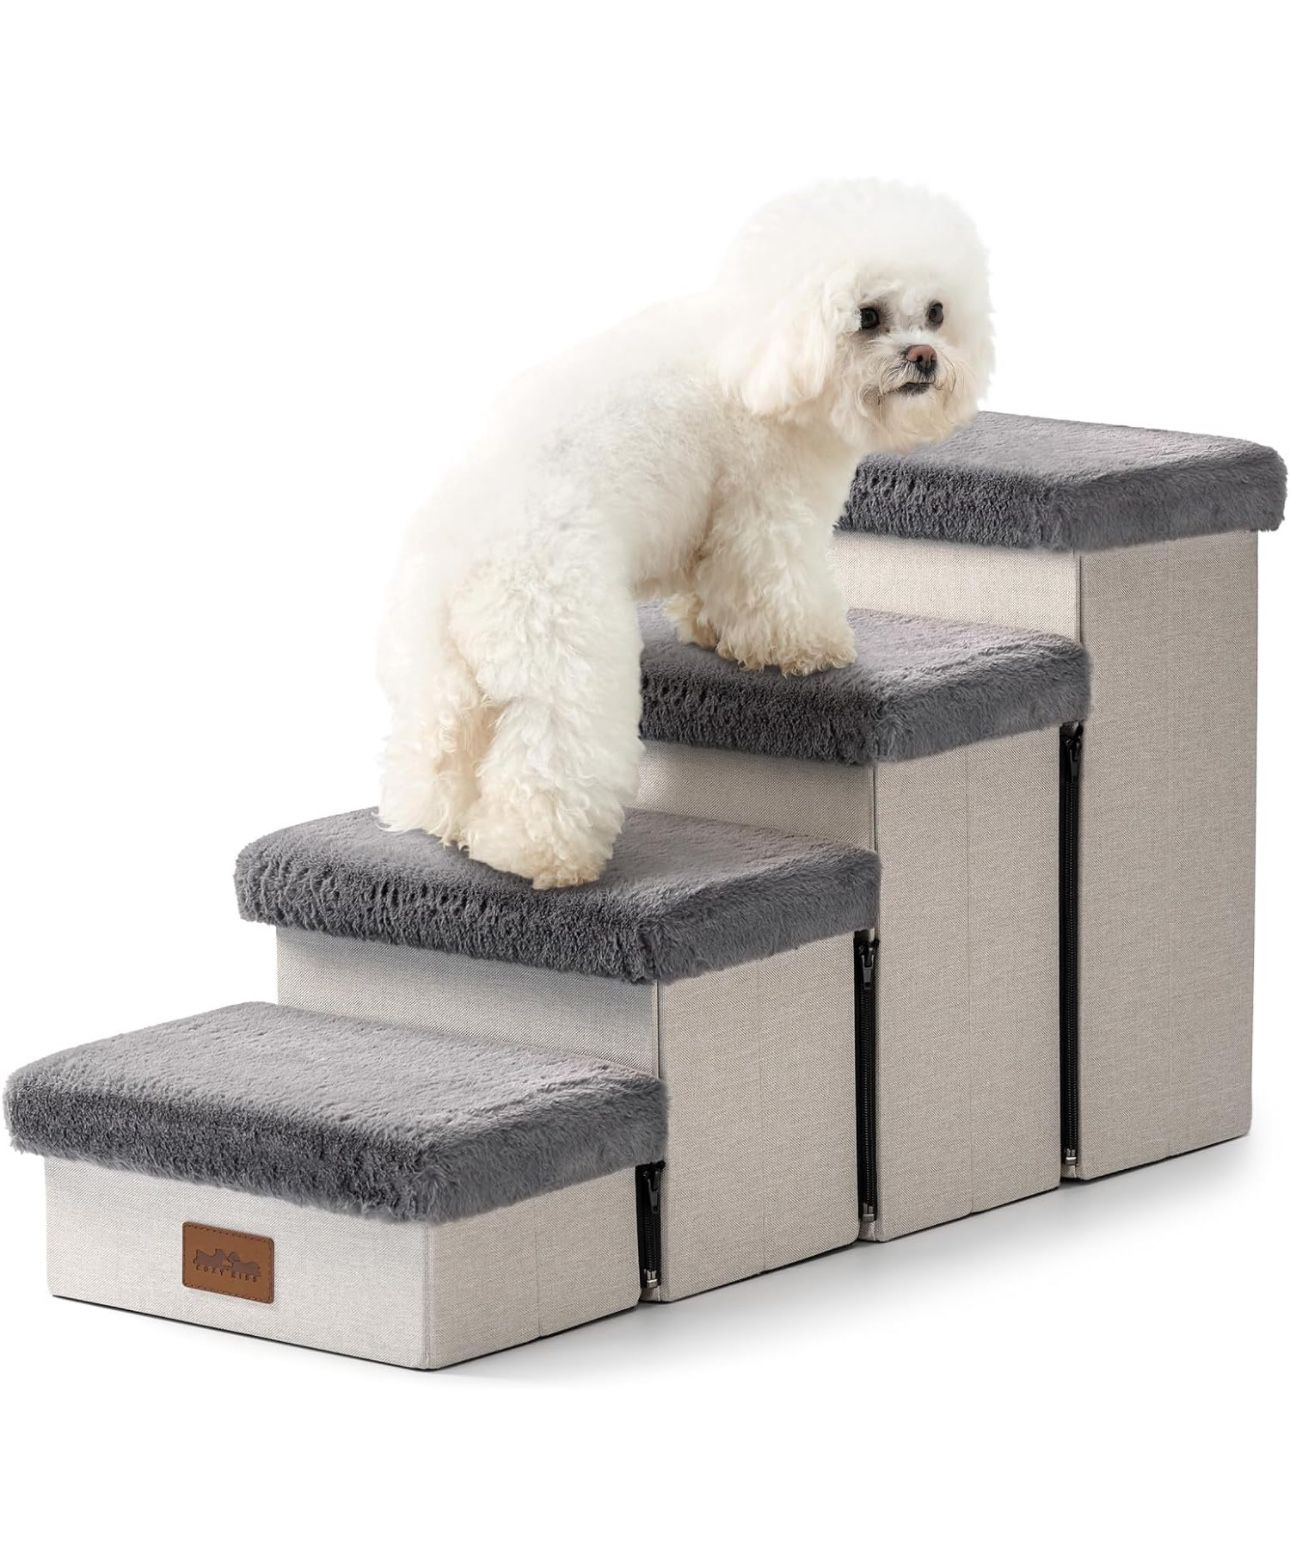 New: 4 Pet Stairs with Storage and Adjustable Steps for High Beds and Couch